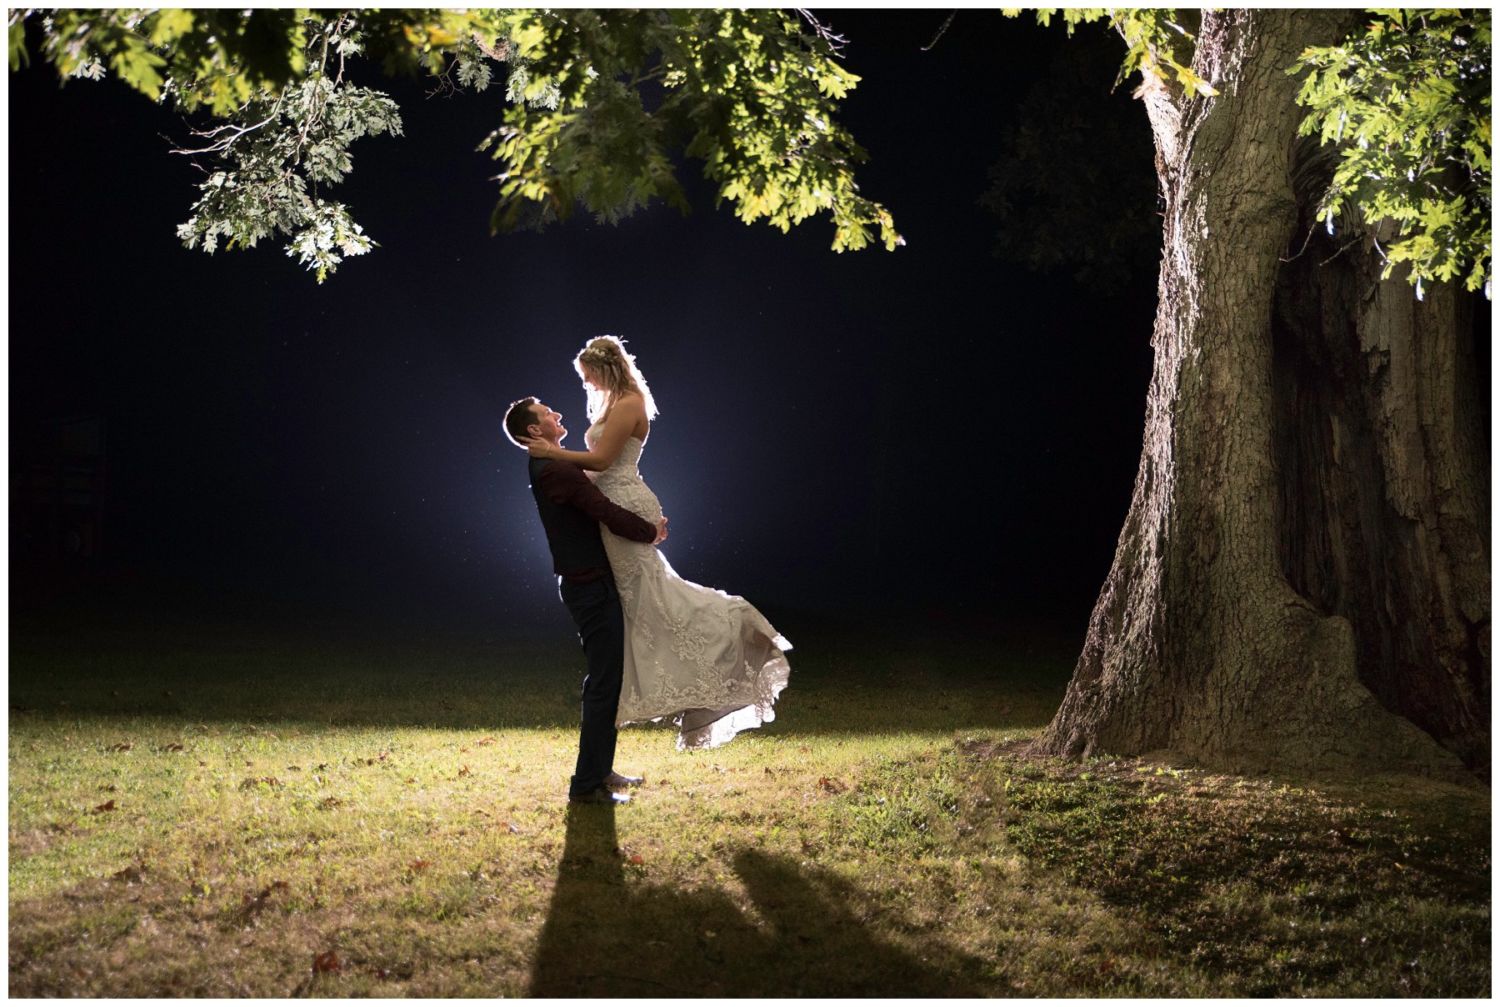 wedding-photography-tips-tricks-if-you-are-just-starting-out